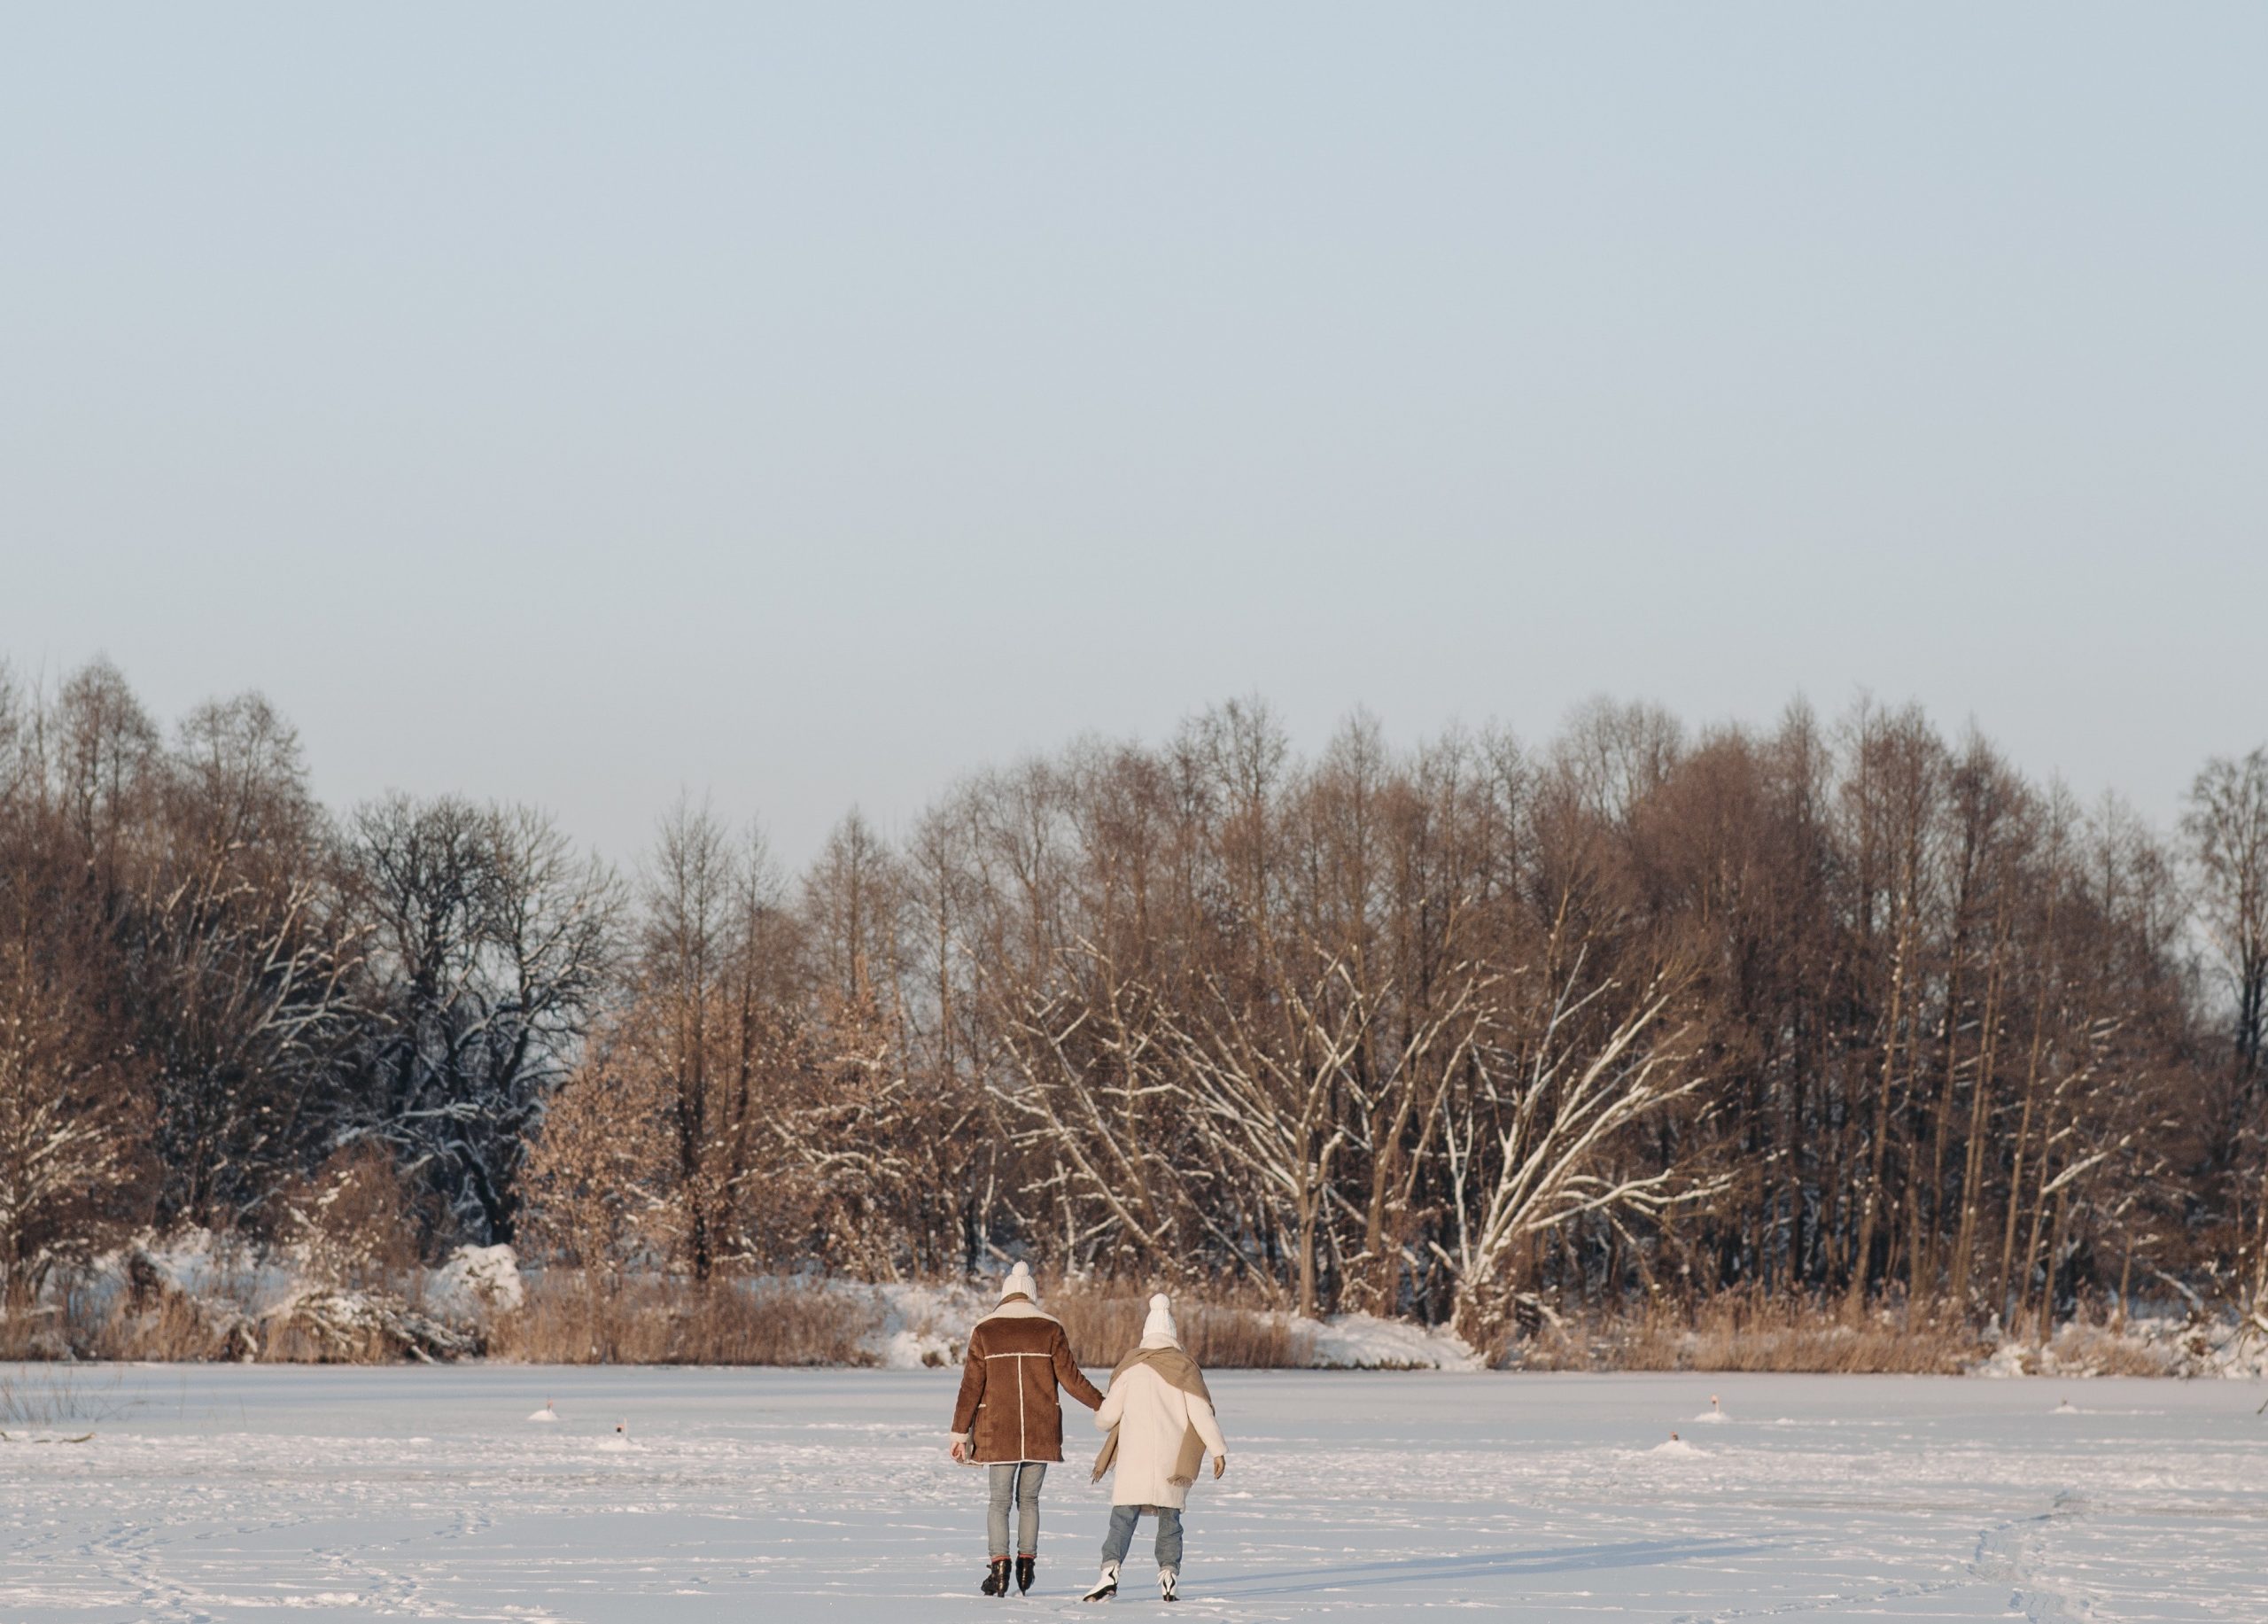 a photo of a frozen pond with two small figures ice-skating